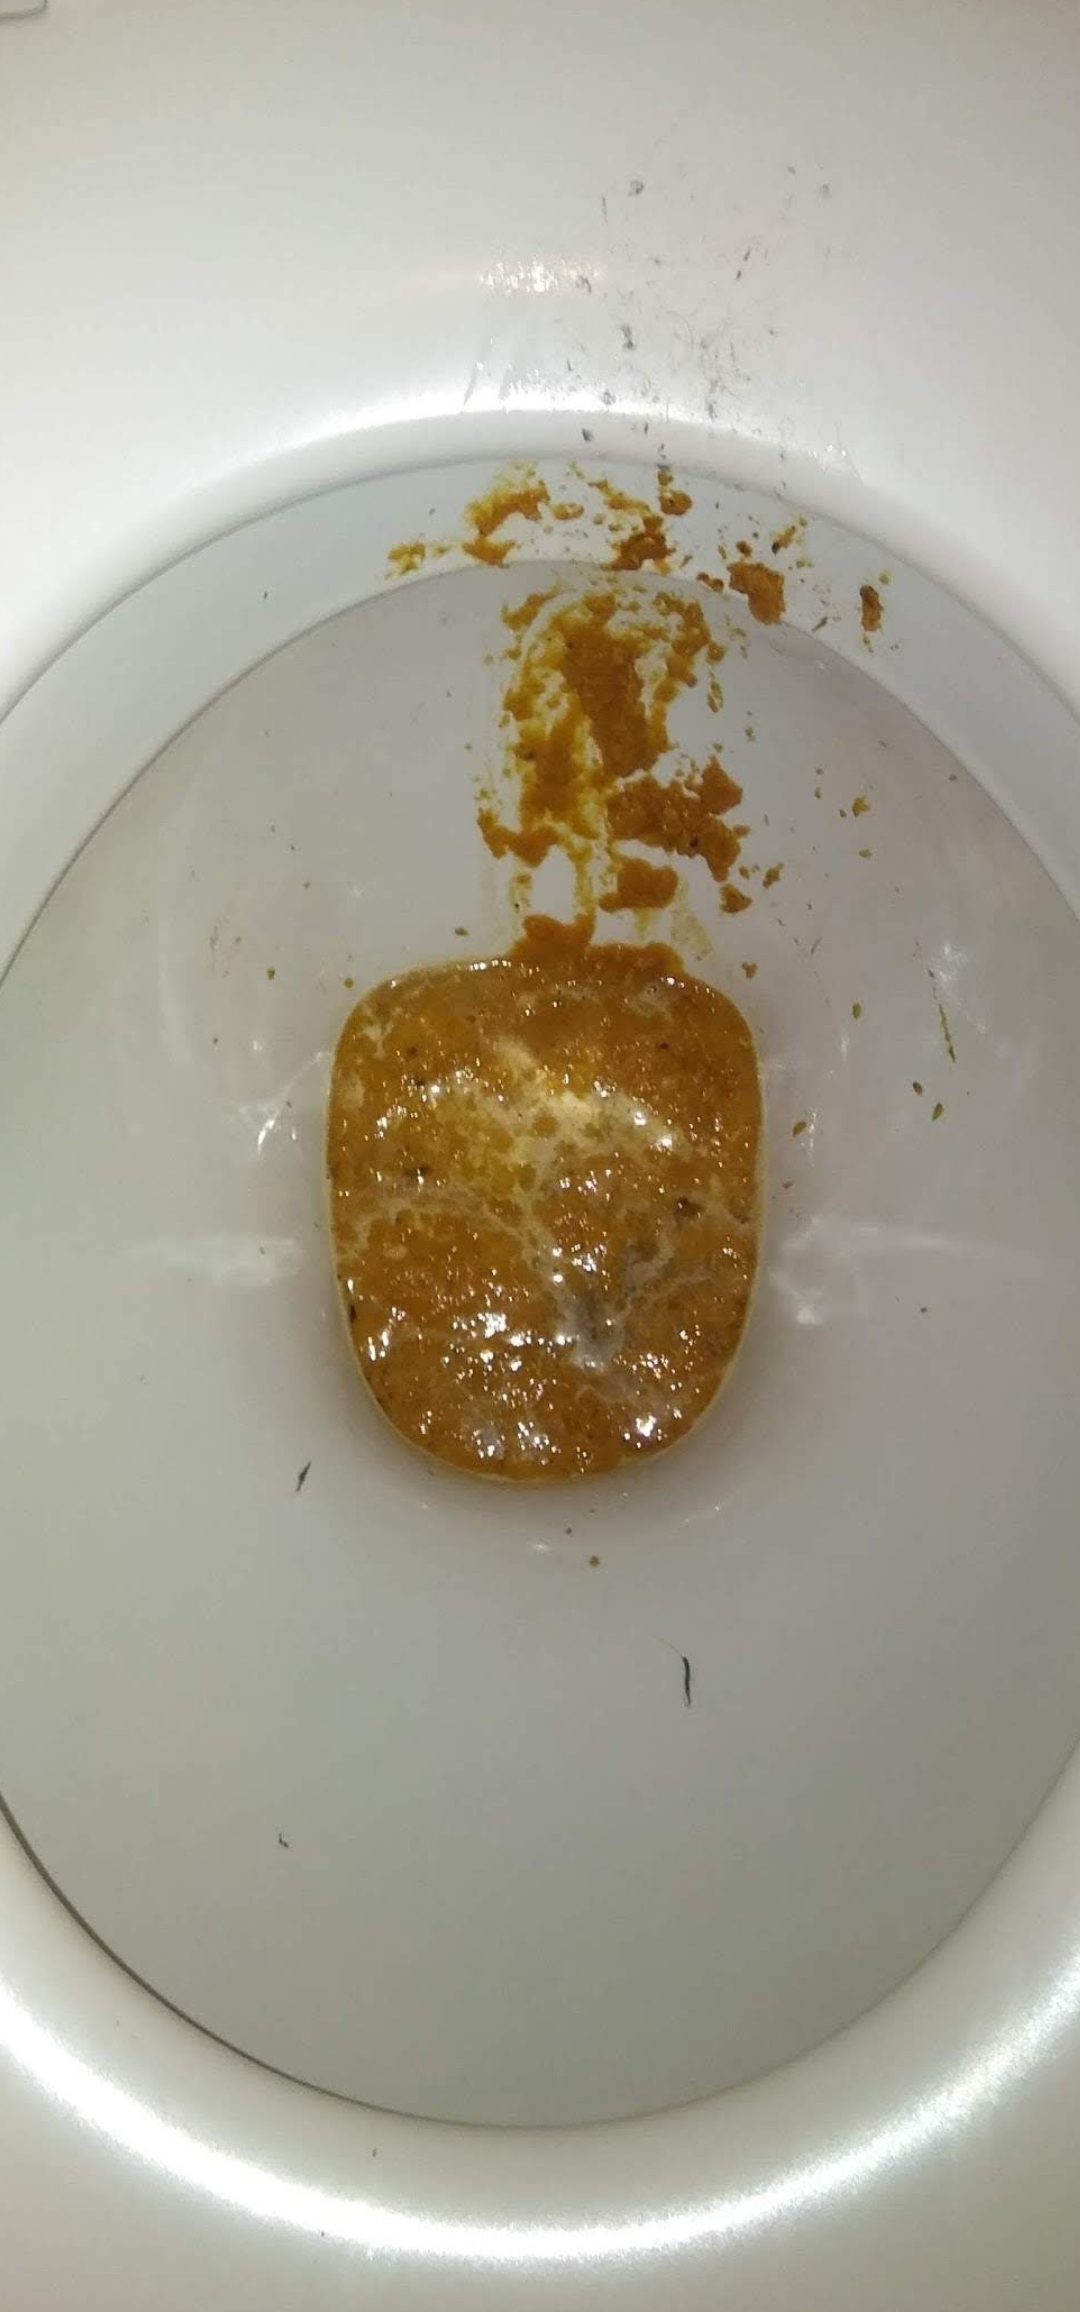 Farty diarrhea shit on Connors loo